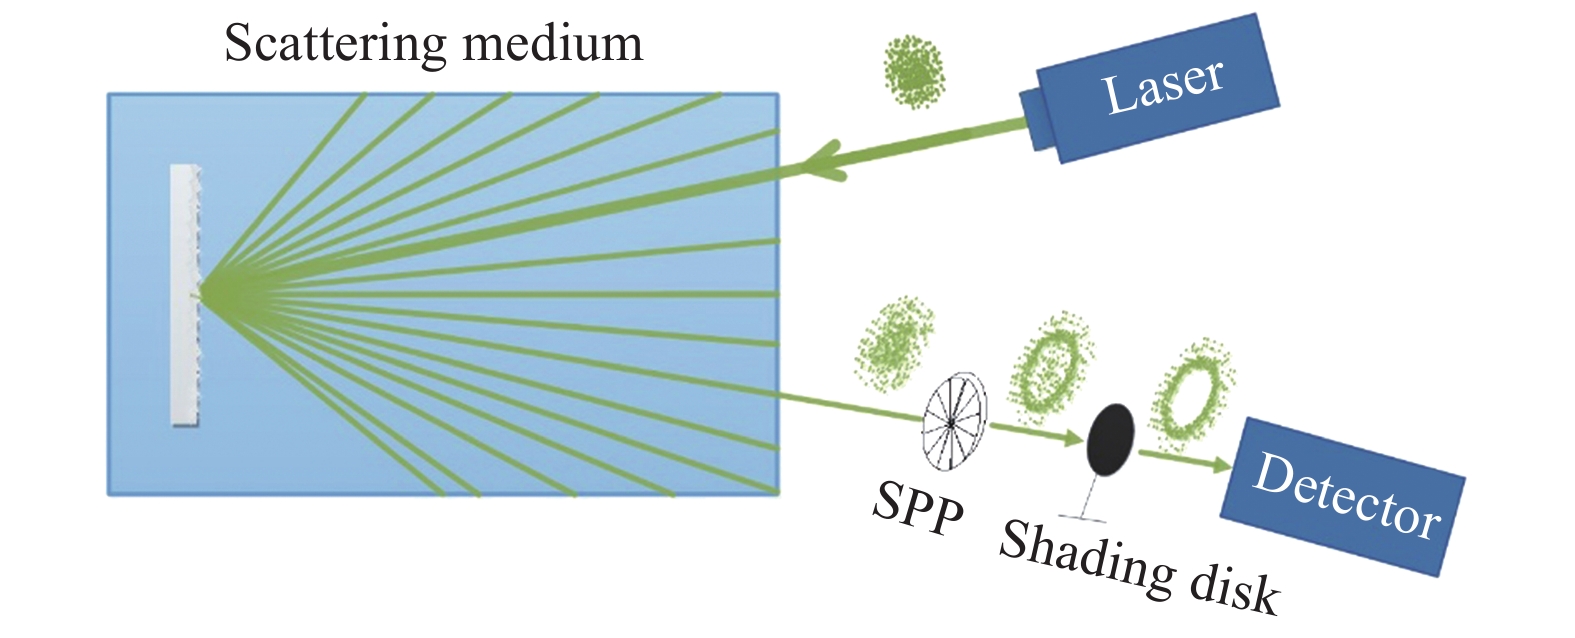 Schematic diagram of spatial filtering of vortex light field in detection lidar in strong scattering environment